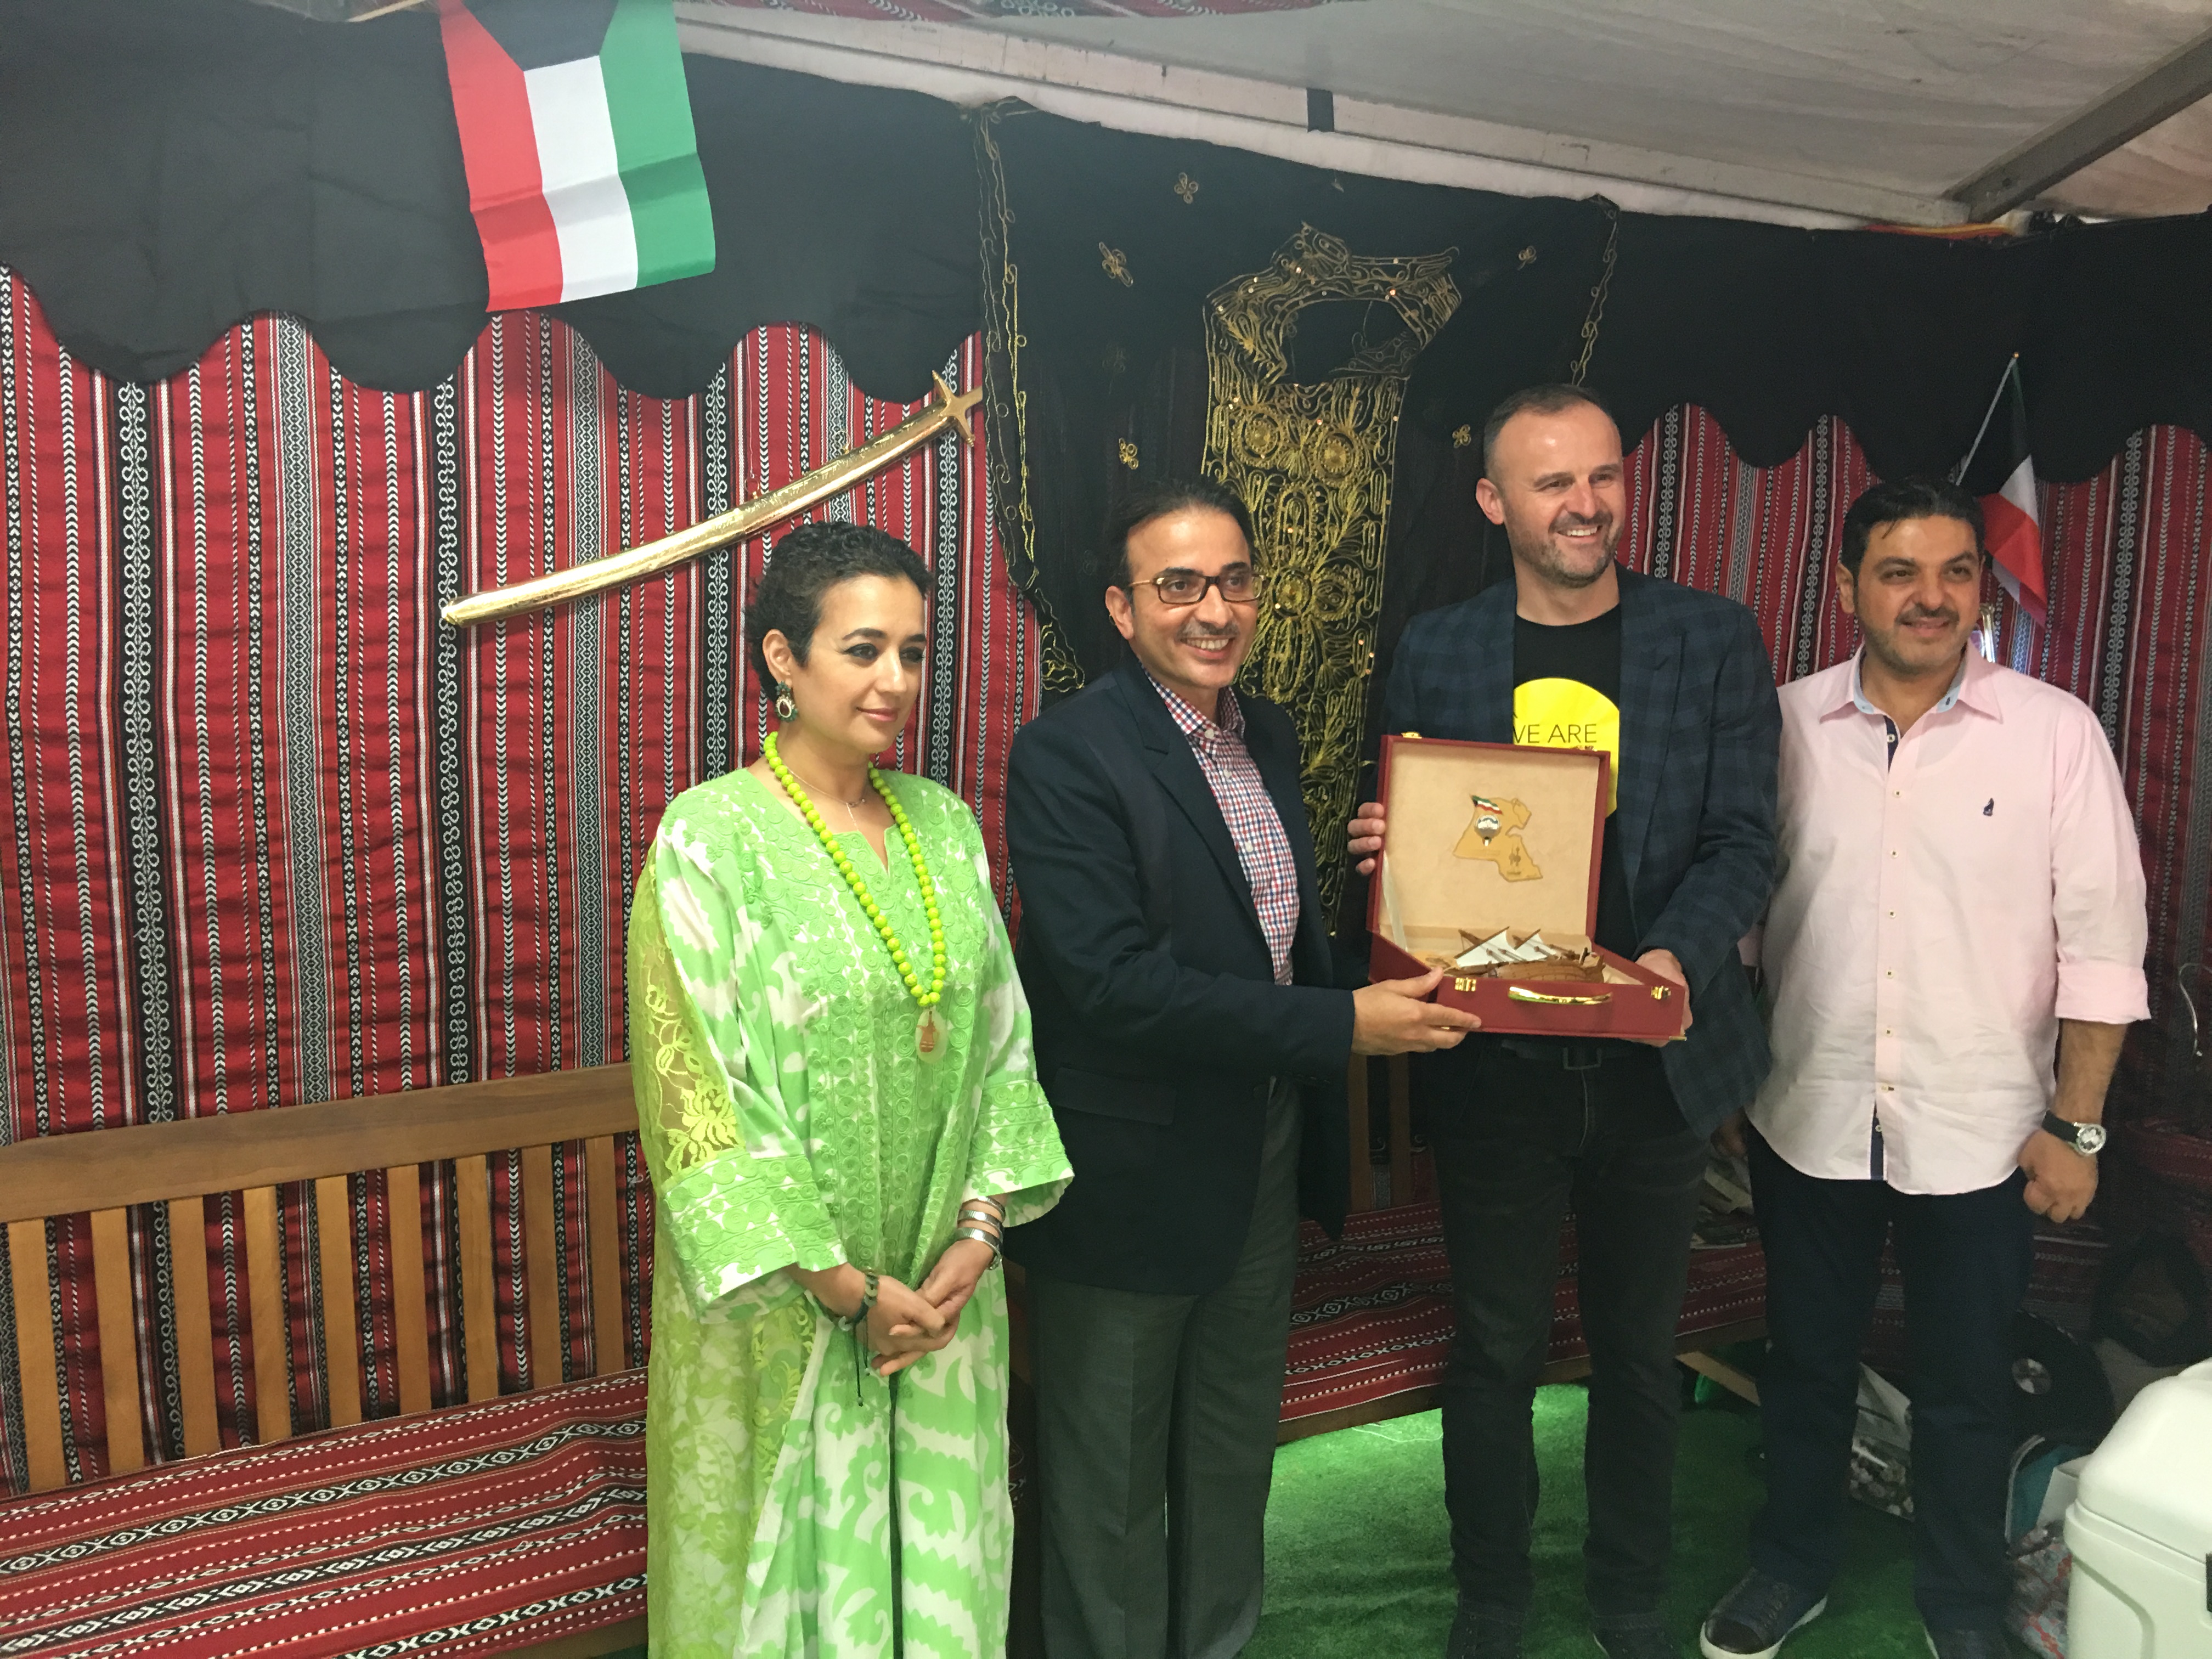 The pavilion was visited by Head of the Australian Capital Territory Andrew James Barr as the honorary guest, and Kuwait's Ambassador to Australia Najib Abdulrahman Al-Bader